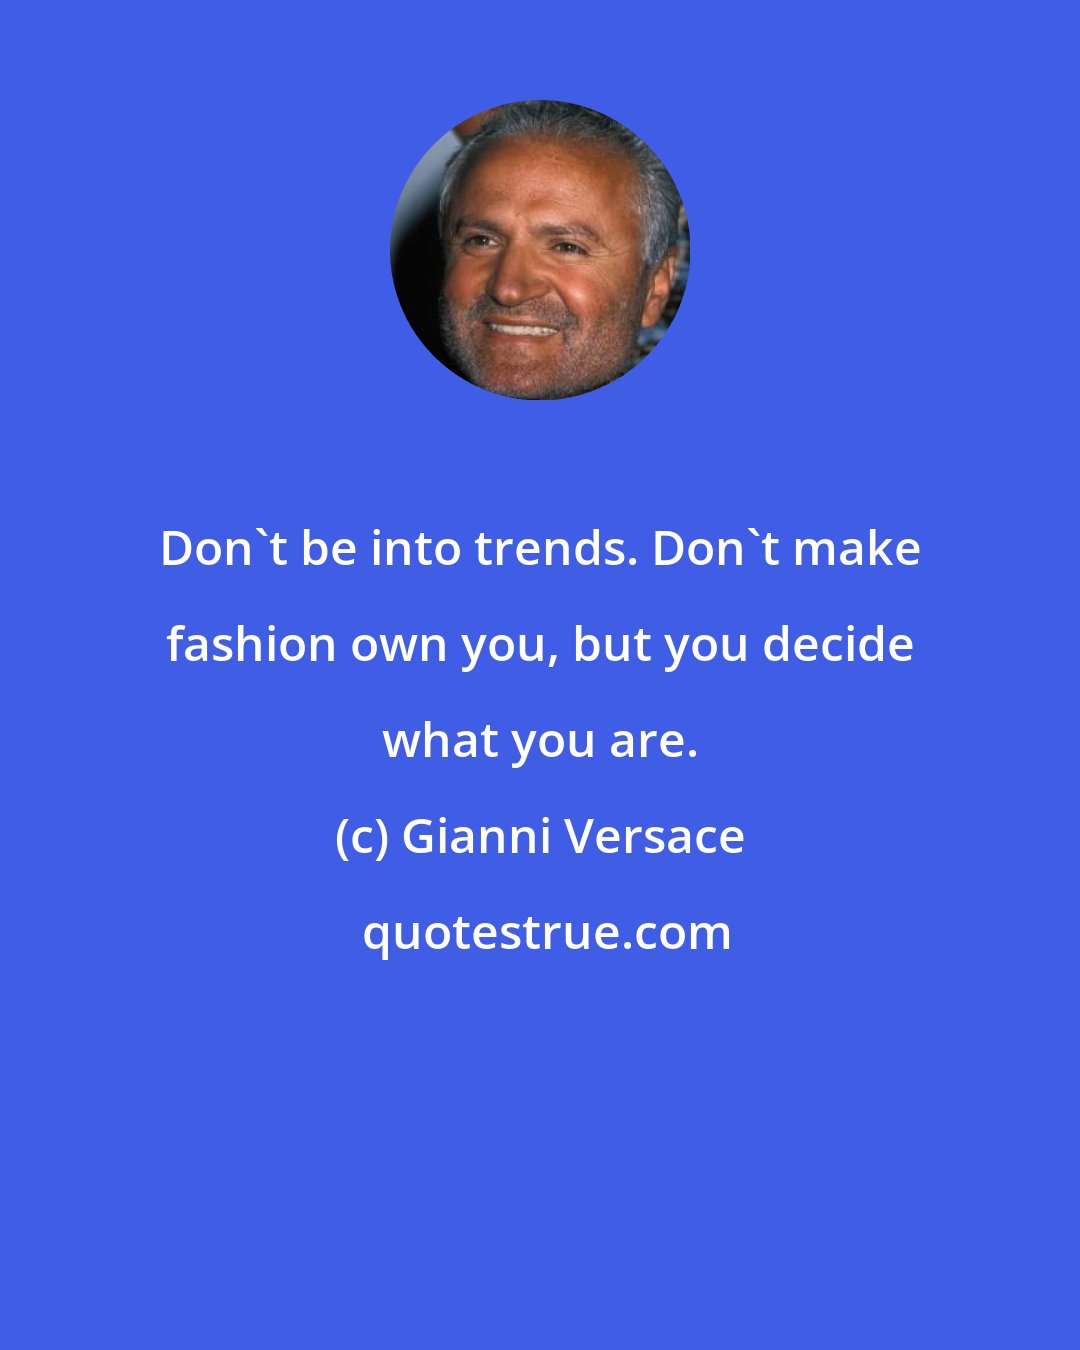 Gianni Versace: Don't be into trends. Don't make fashion own you, but you decide what you are.